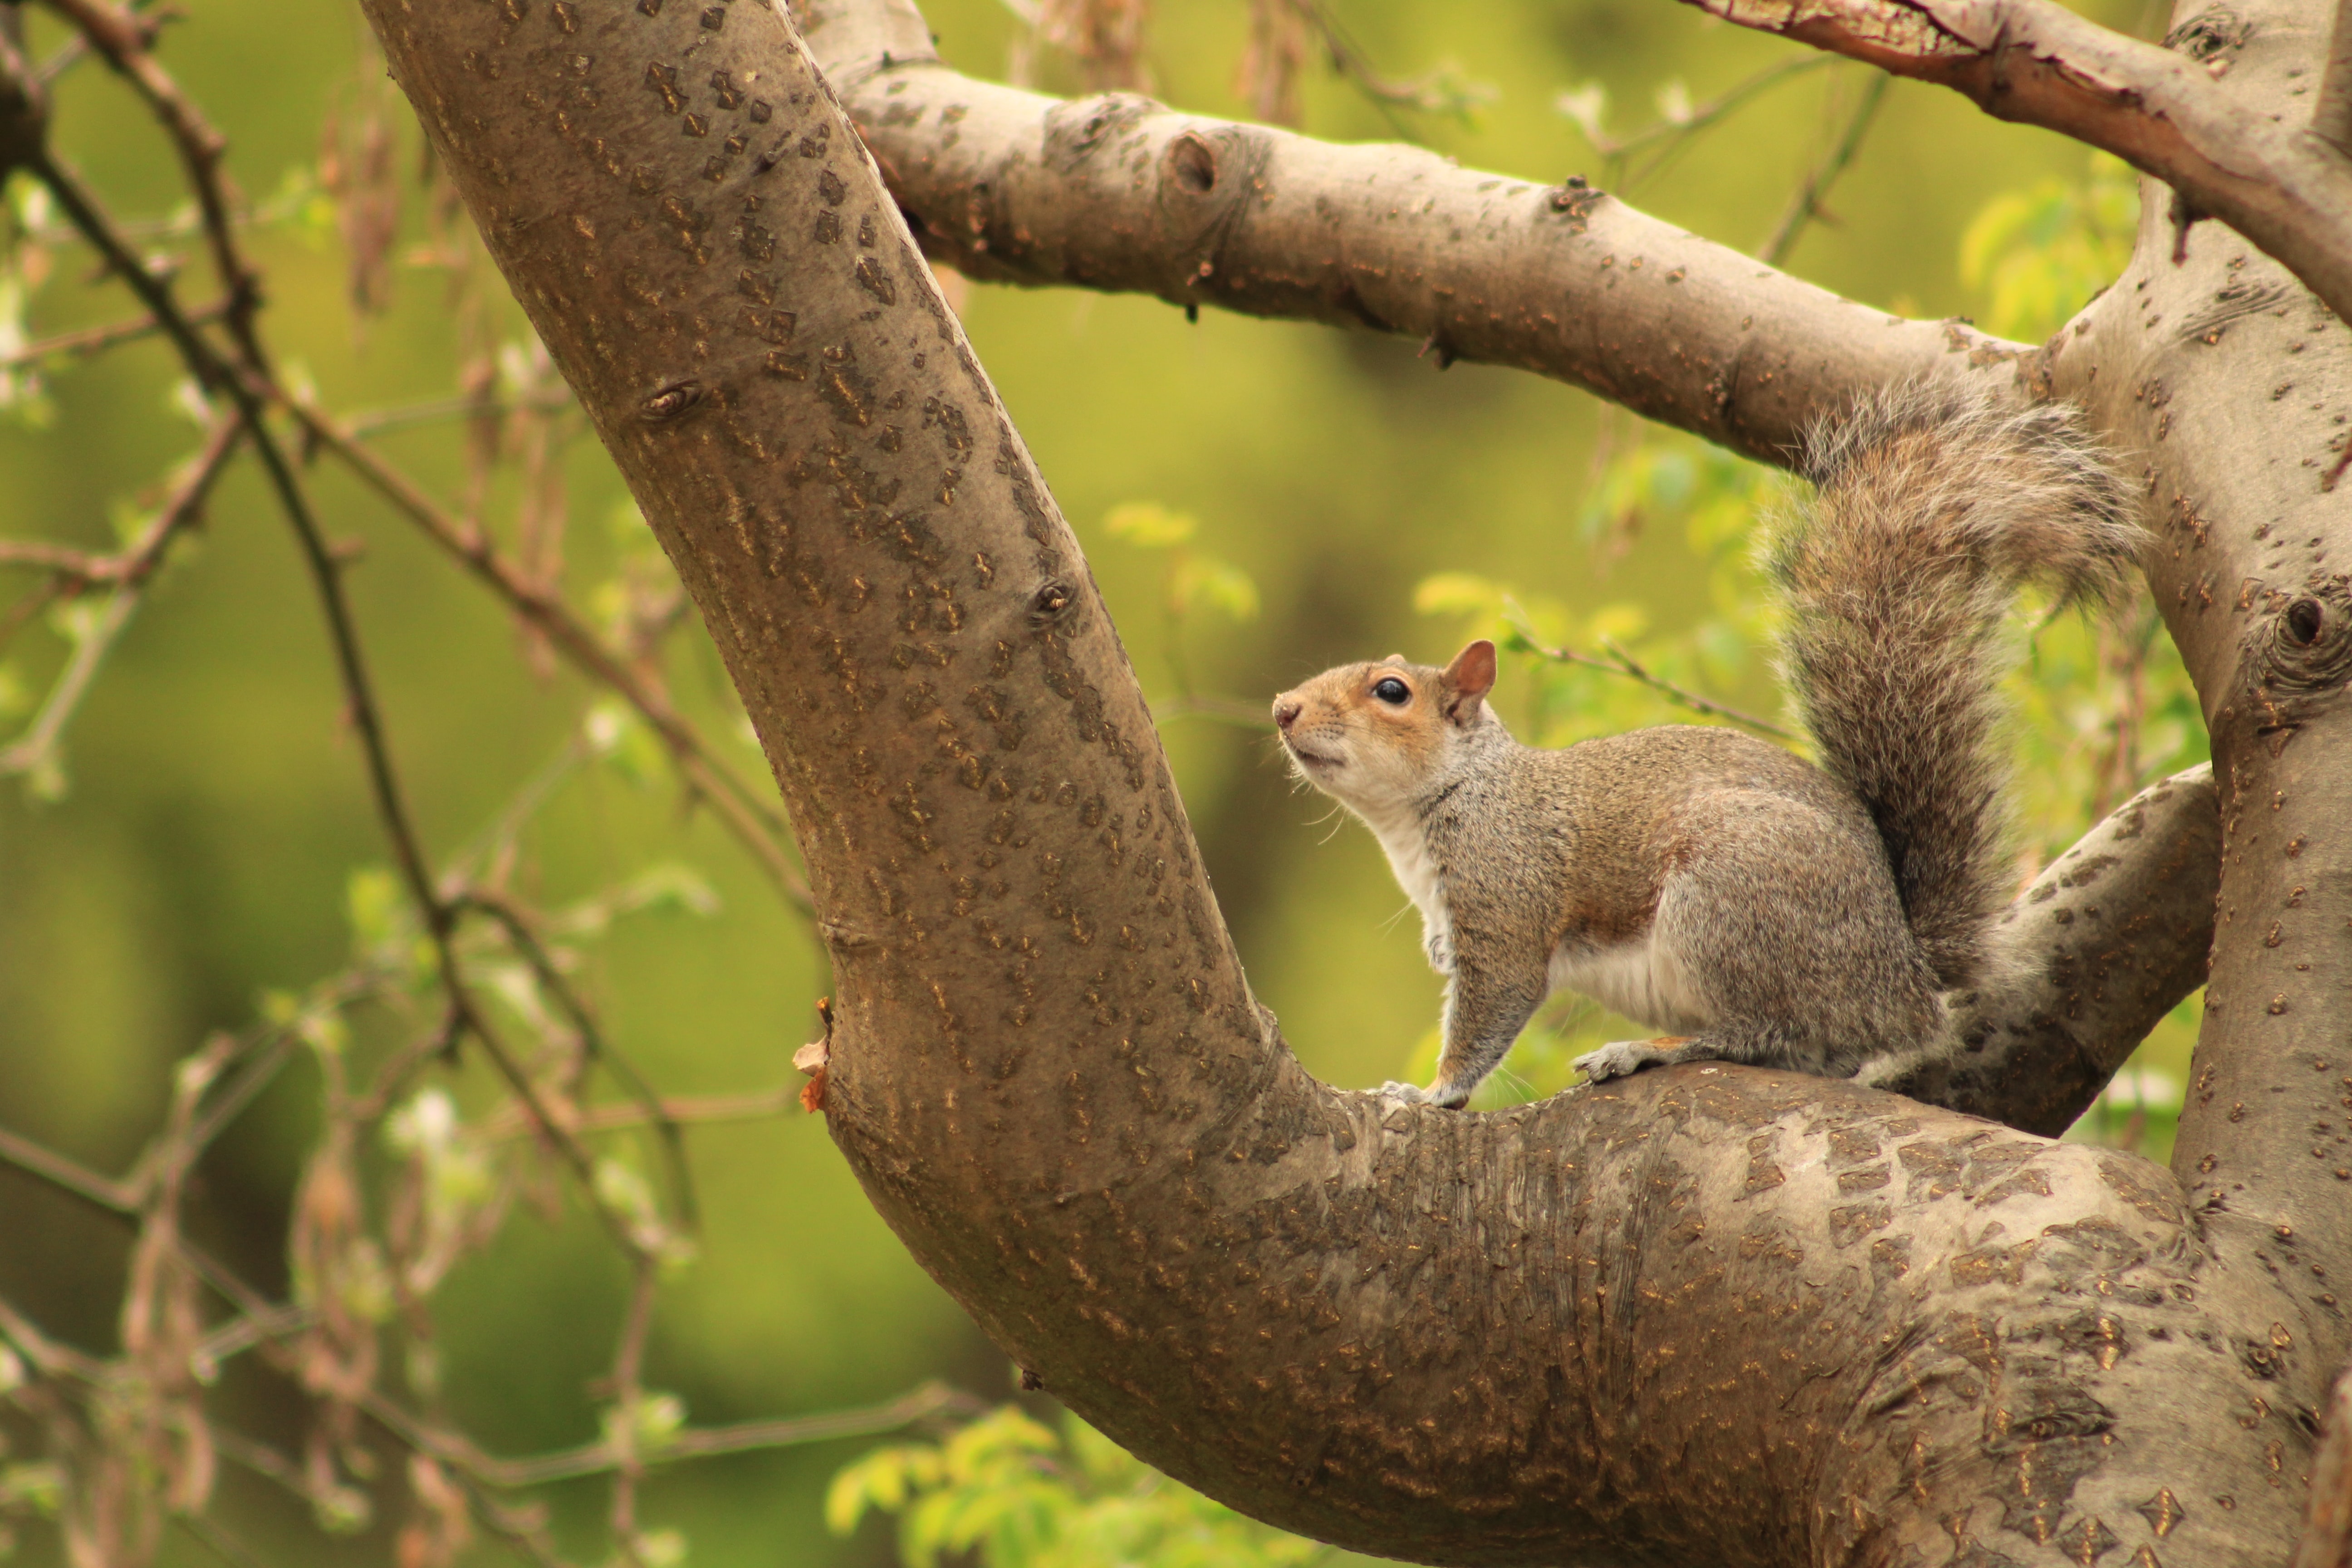 A squirell on a branch